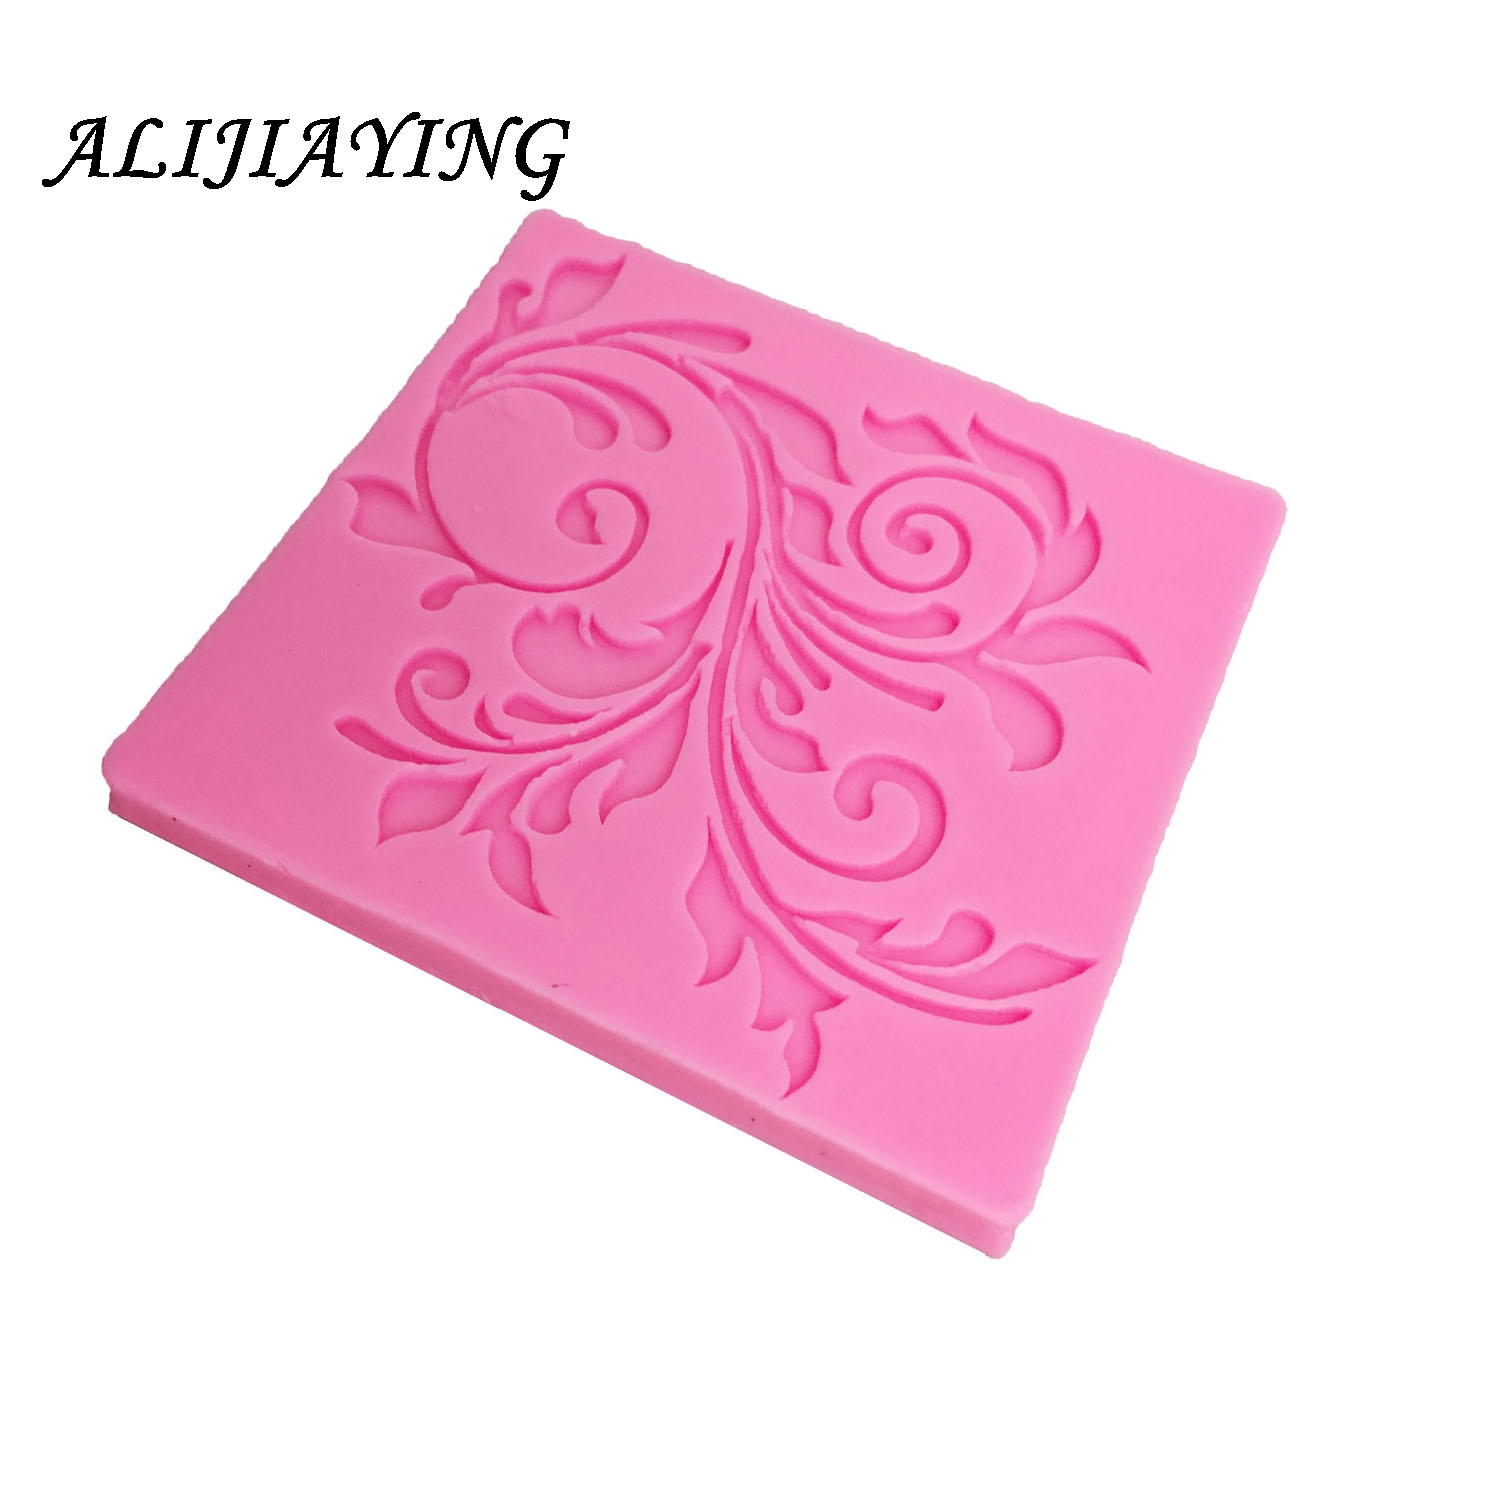 Leaf Flower Lace 3D Silicone Mold